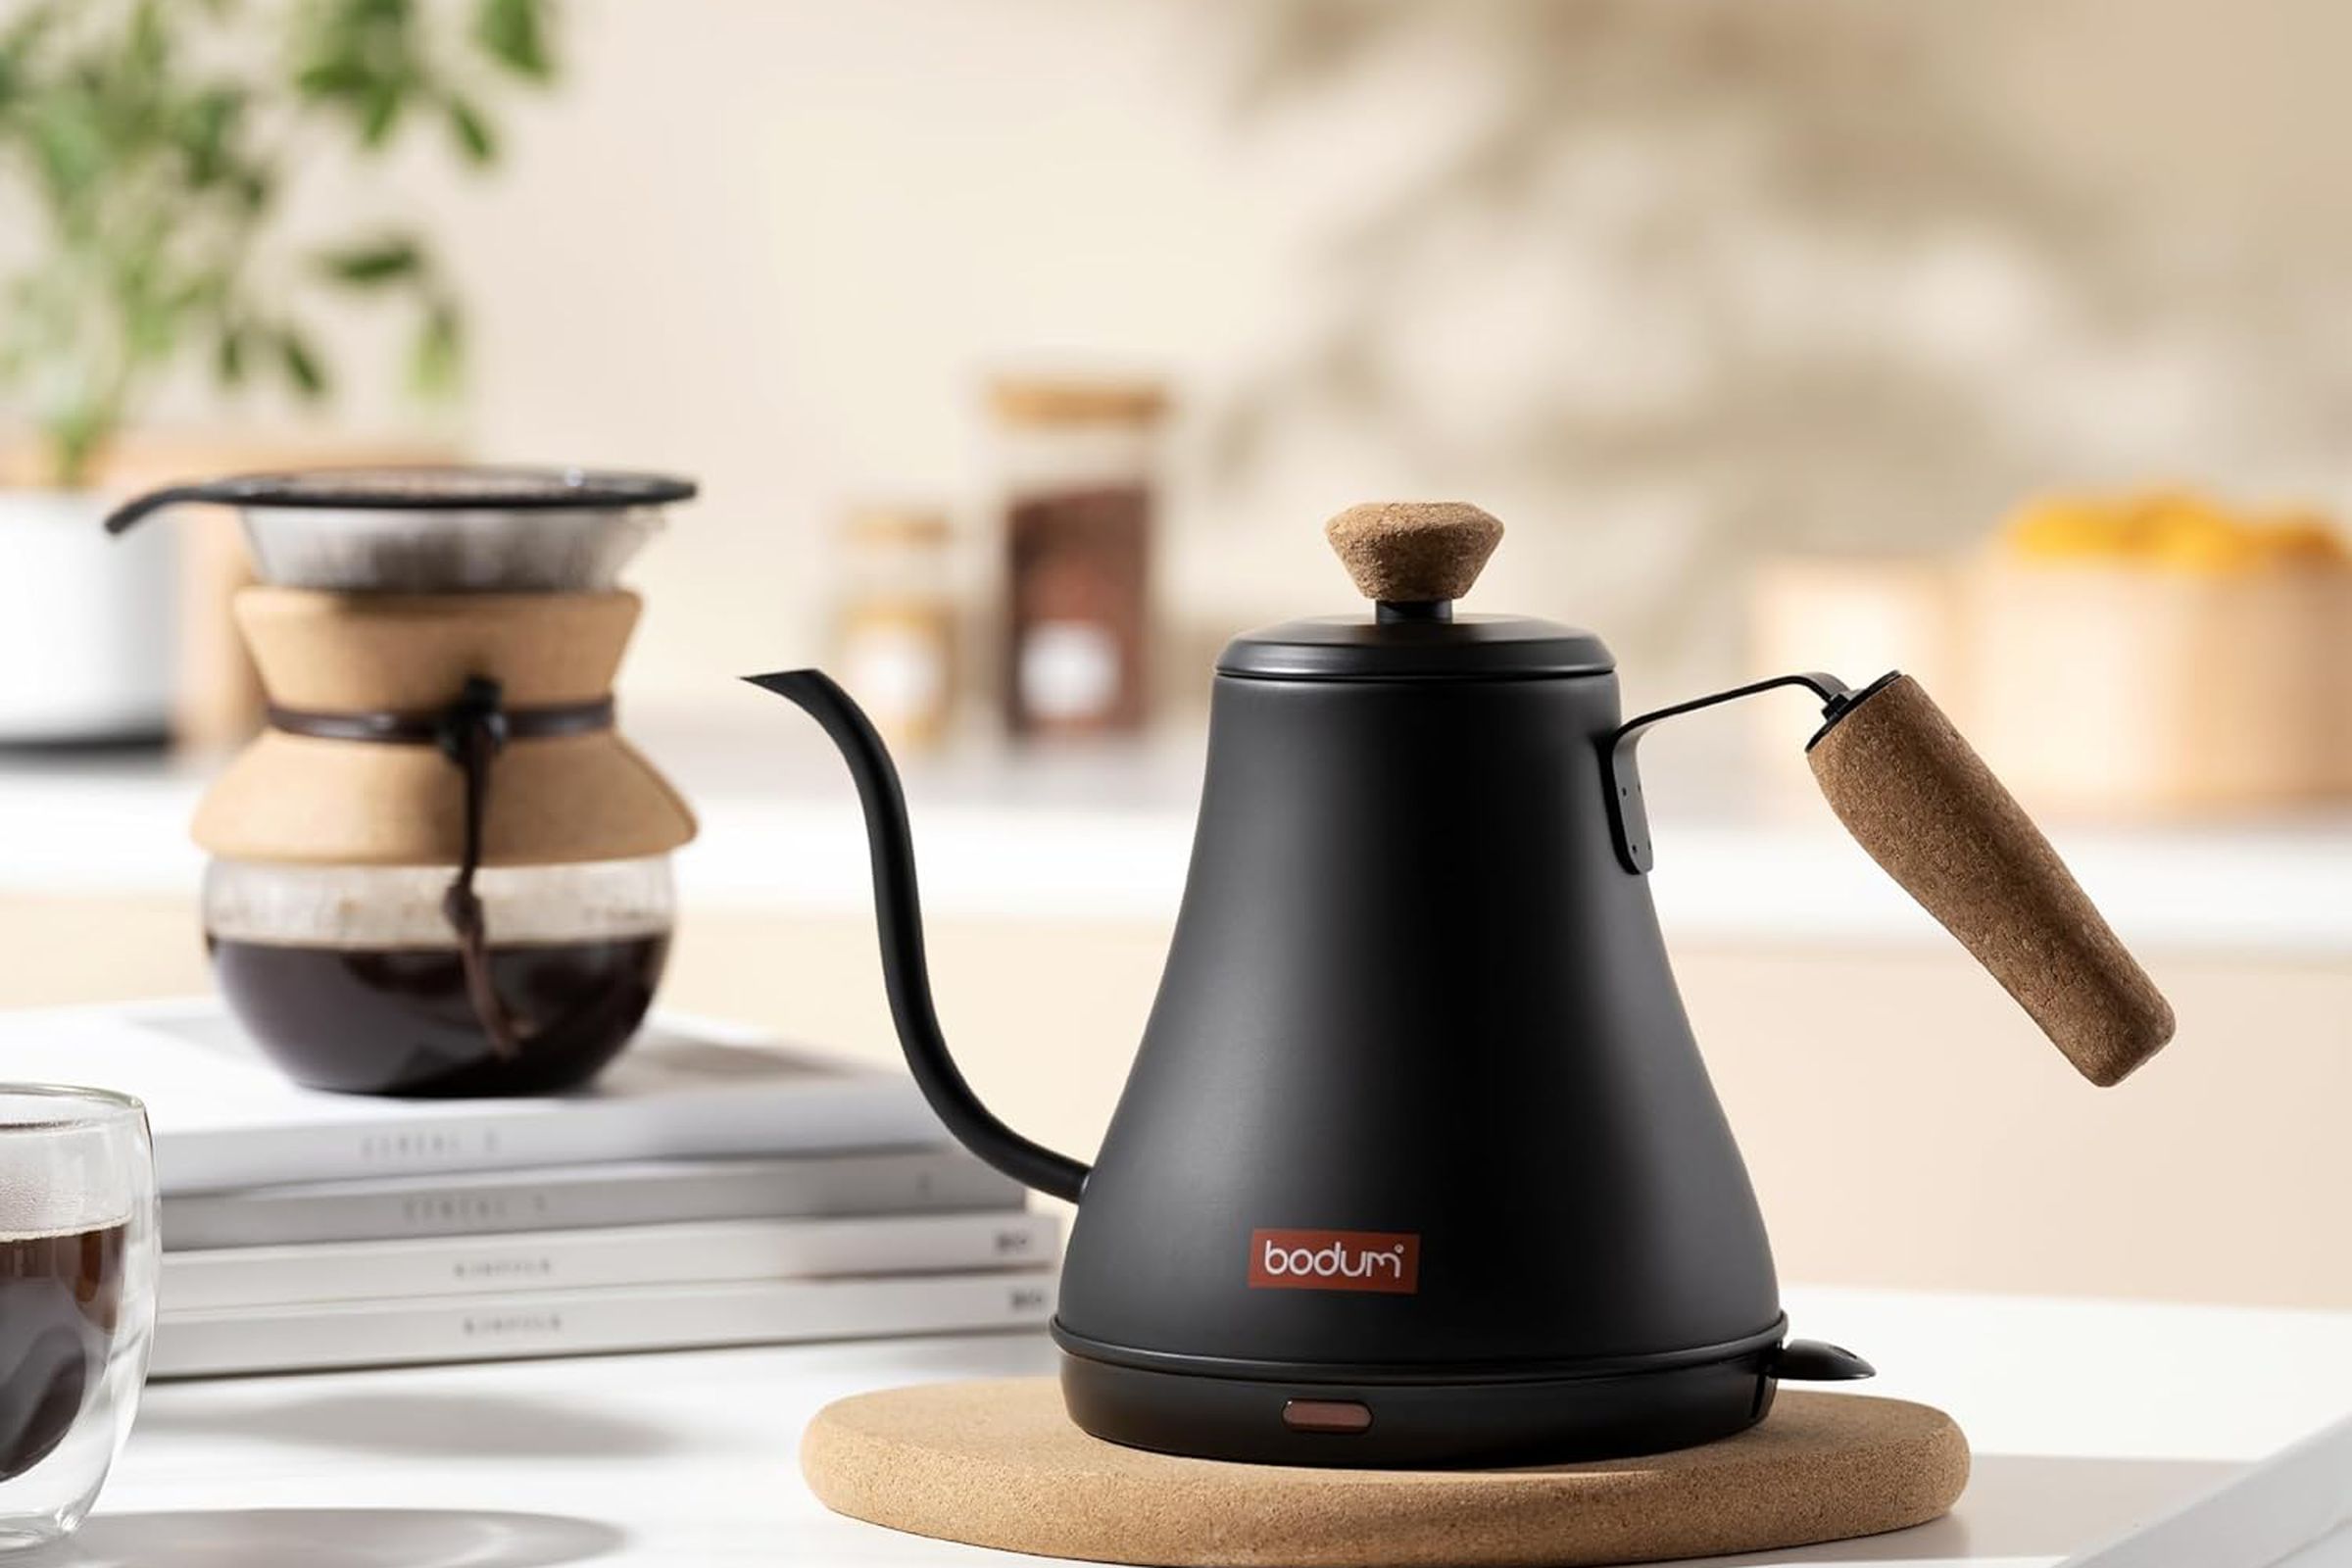 Black gooseneck electric kettle on a table, a pot of coffee in the background.